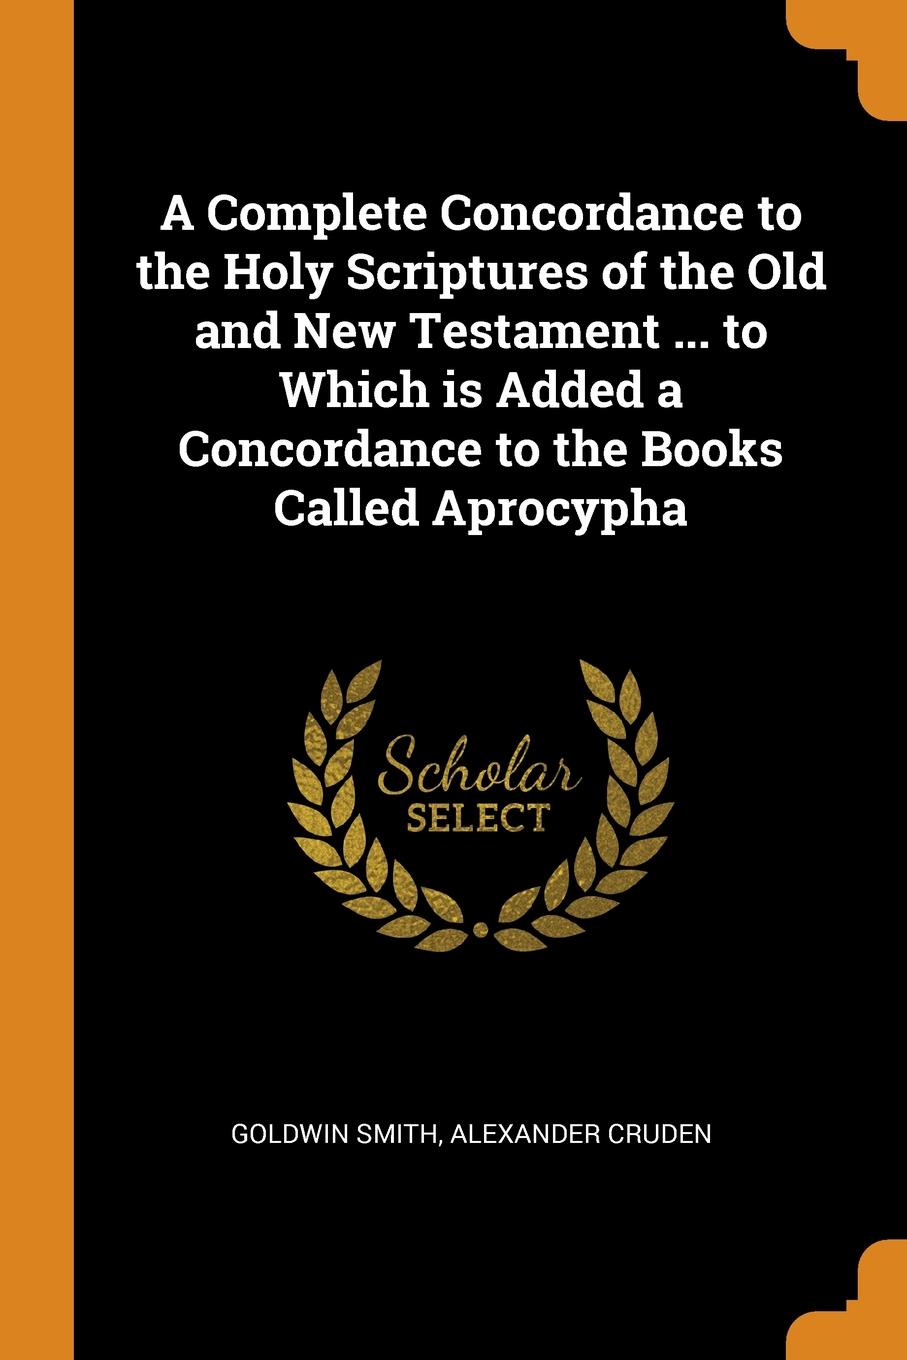 A New Concordance To The Holy Scriptures